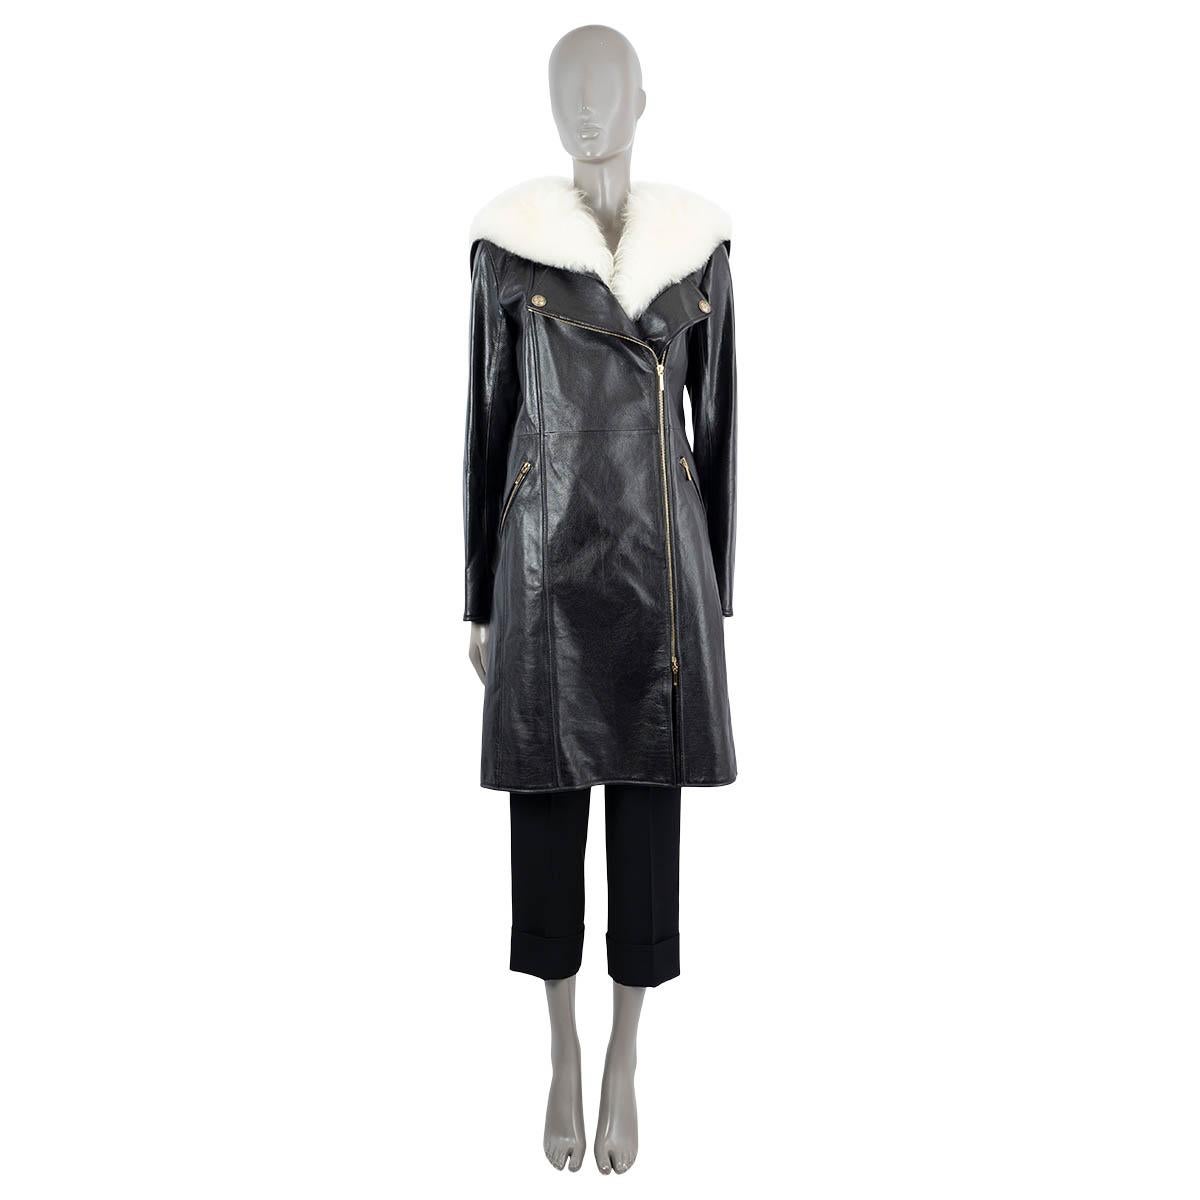 100% authentic Chanel coat in black calfskin leather (100%) with gold-tone hardware. Features a off-white shearling collar with back flap, zip detail on the sleeves with shearling trim and two zip pockets on the front. Closes with a zipper on the